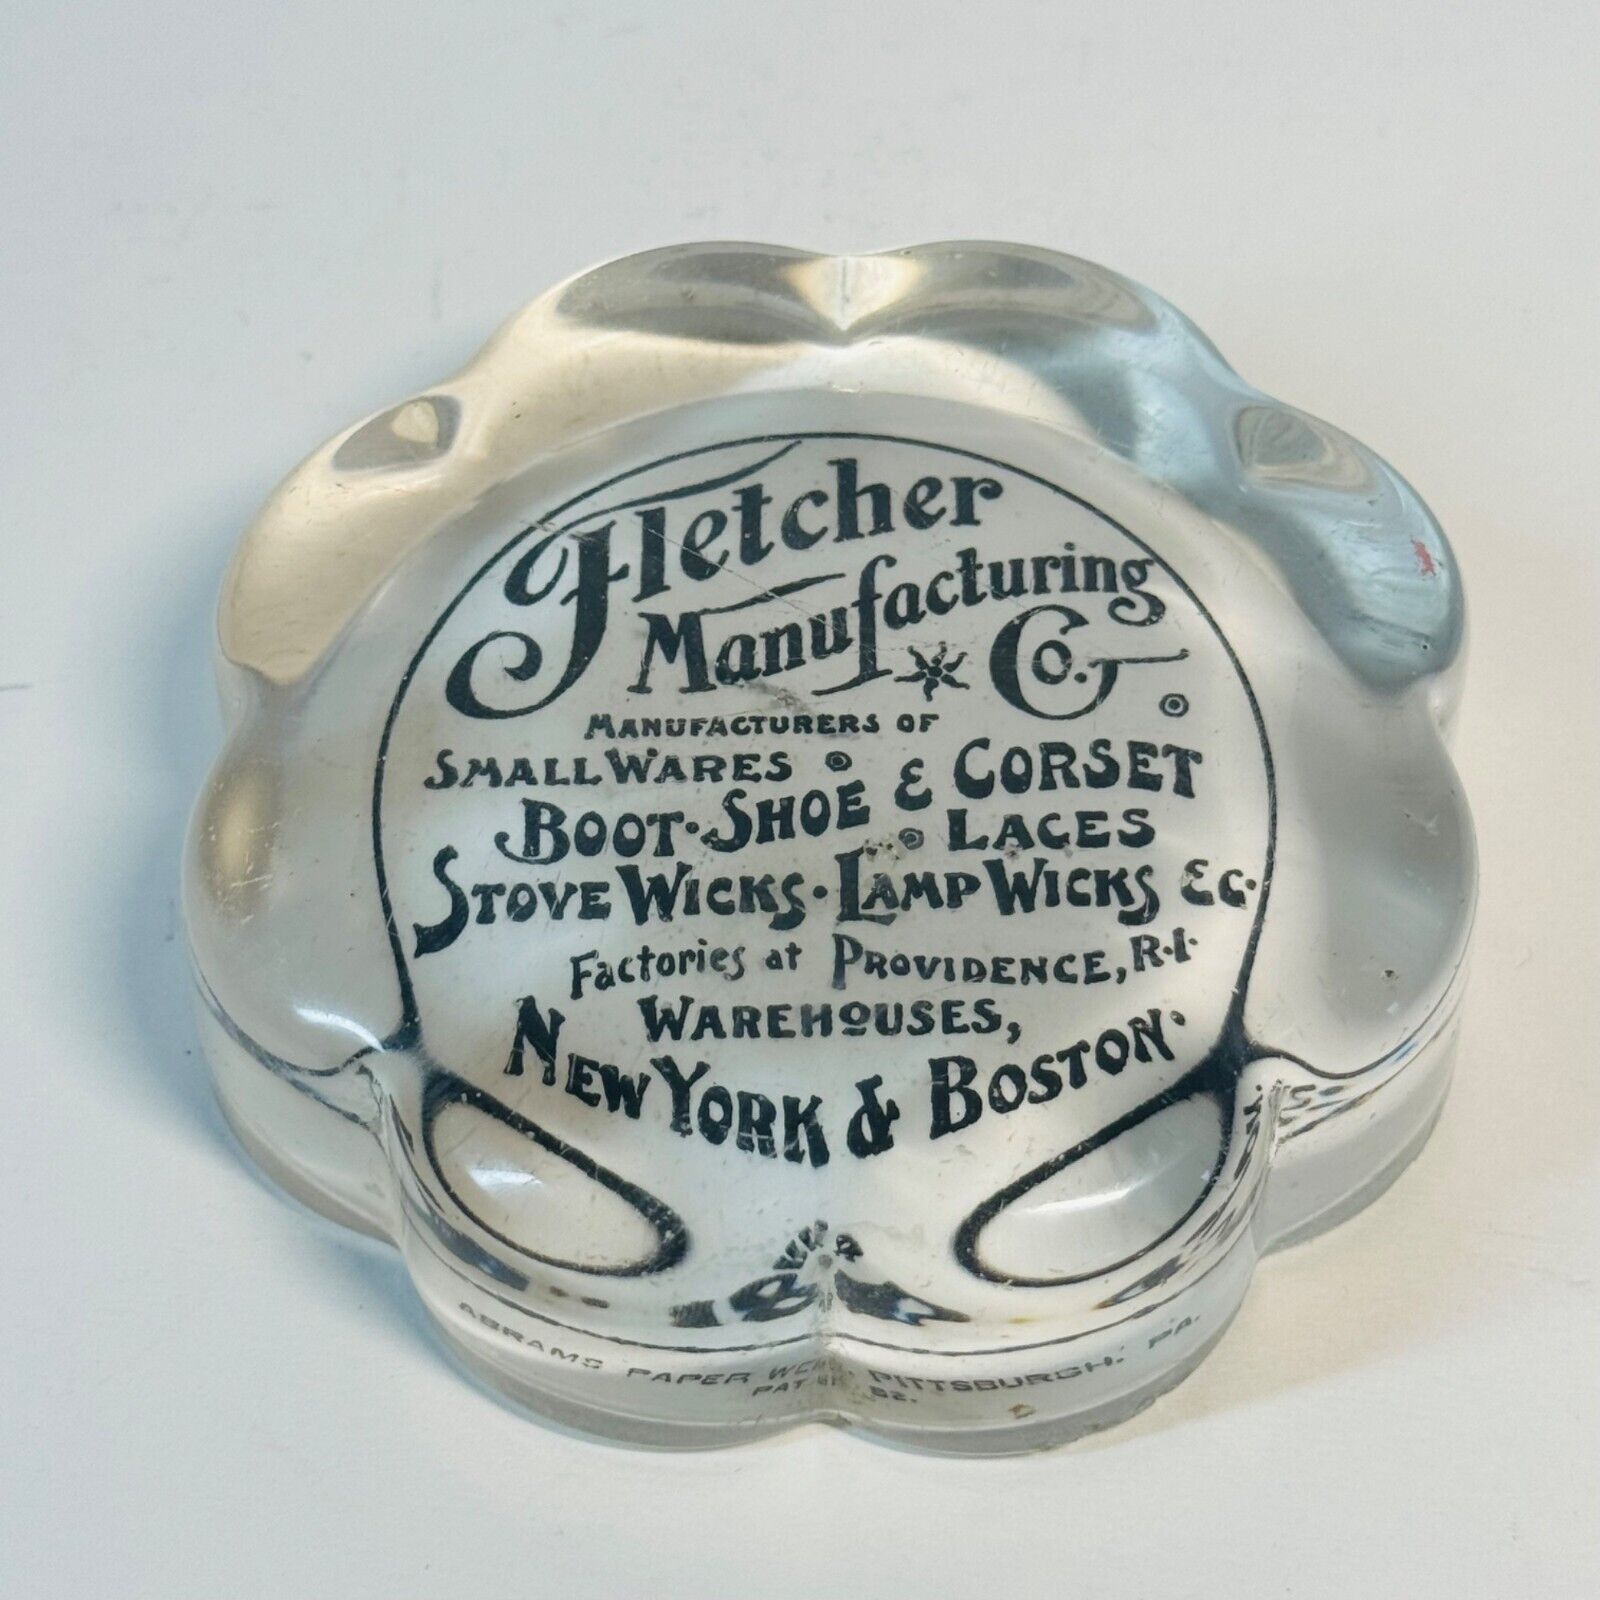 Vintage Fletcher Manufacturing Advertising Glass Paperweight